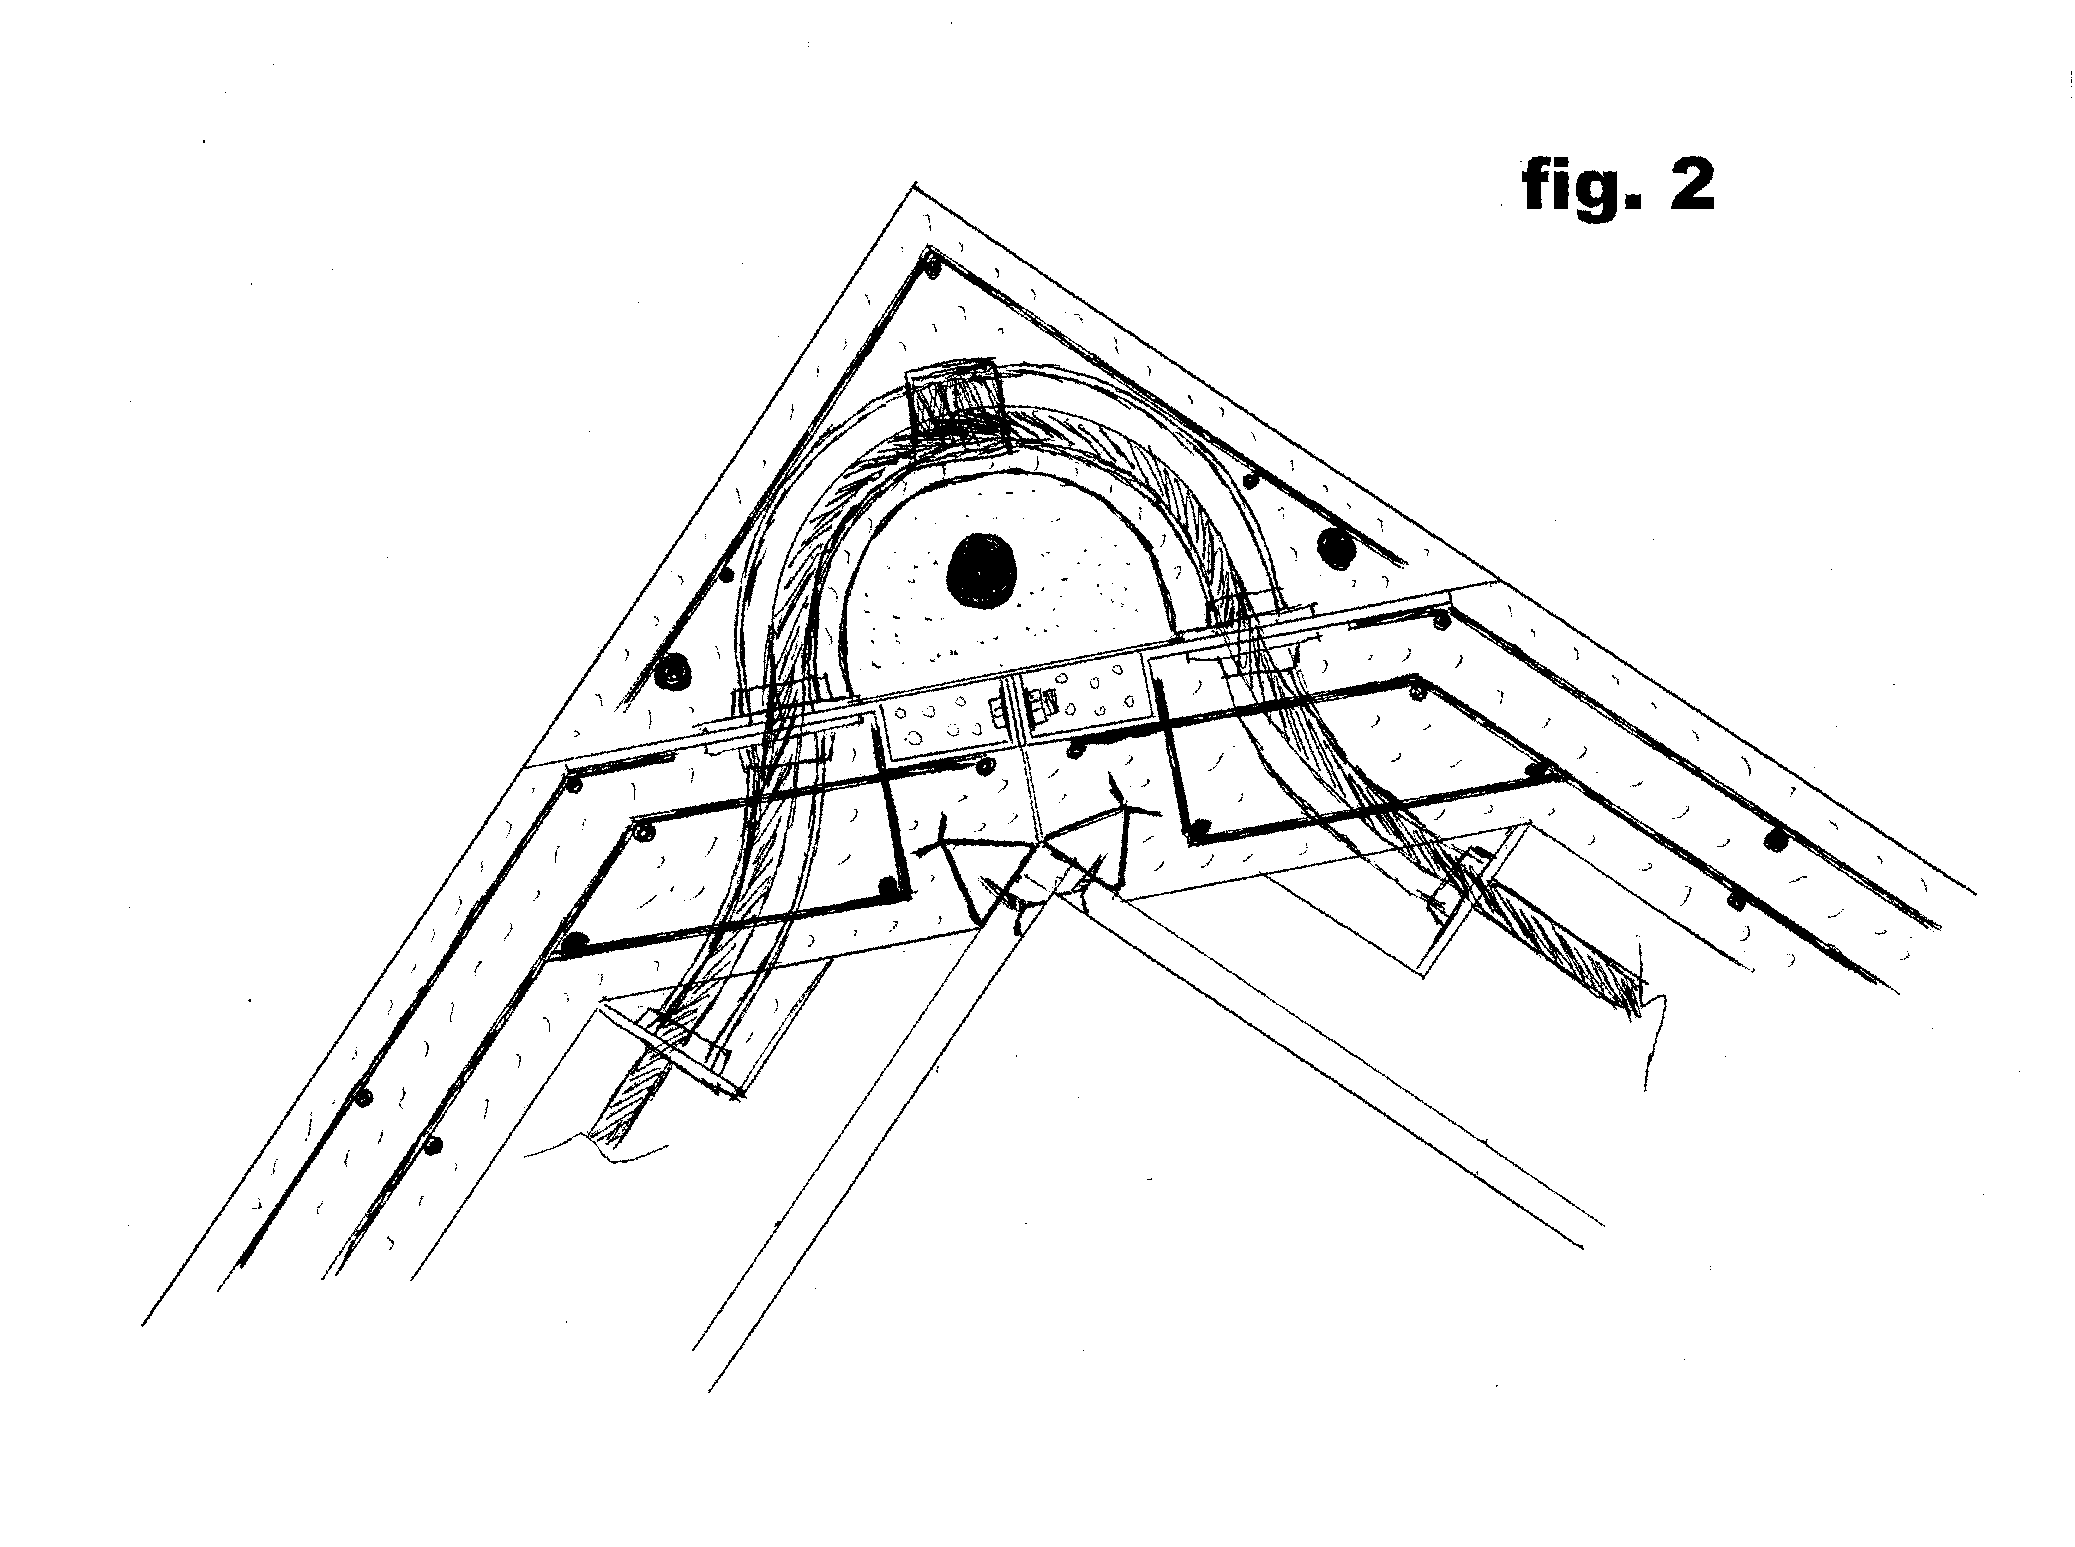 Connectors and Methods of Construction for a Precast Special Concrete Moment Resisting Shear Wall and Precast Special Concrete Moment Resisting Frame Building Panel System